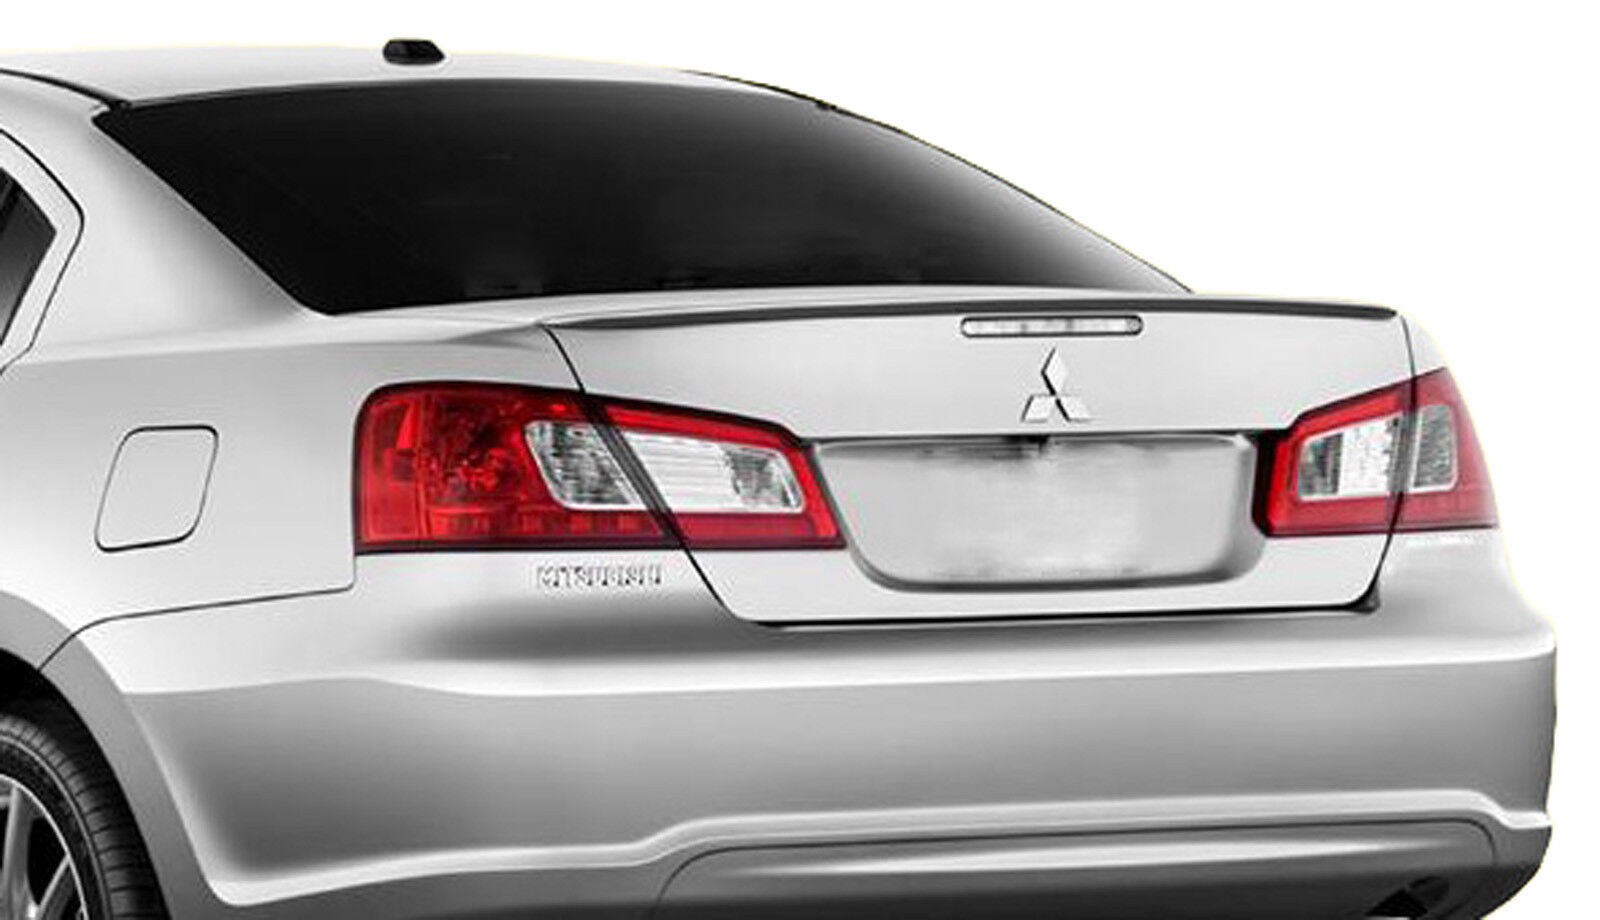 UNPAINTED PRIMED FACTORY STYLE LIP SPOILER FOR A MITSUBISHI GALANT 2009-2012